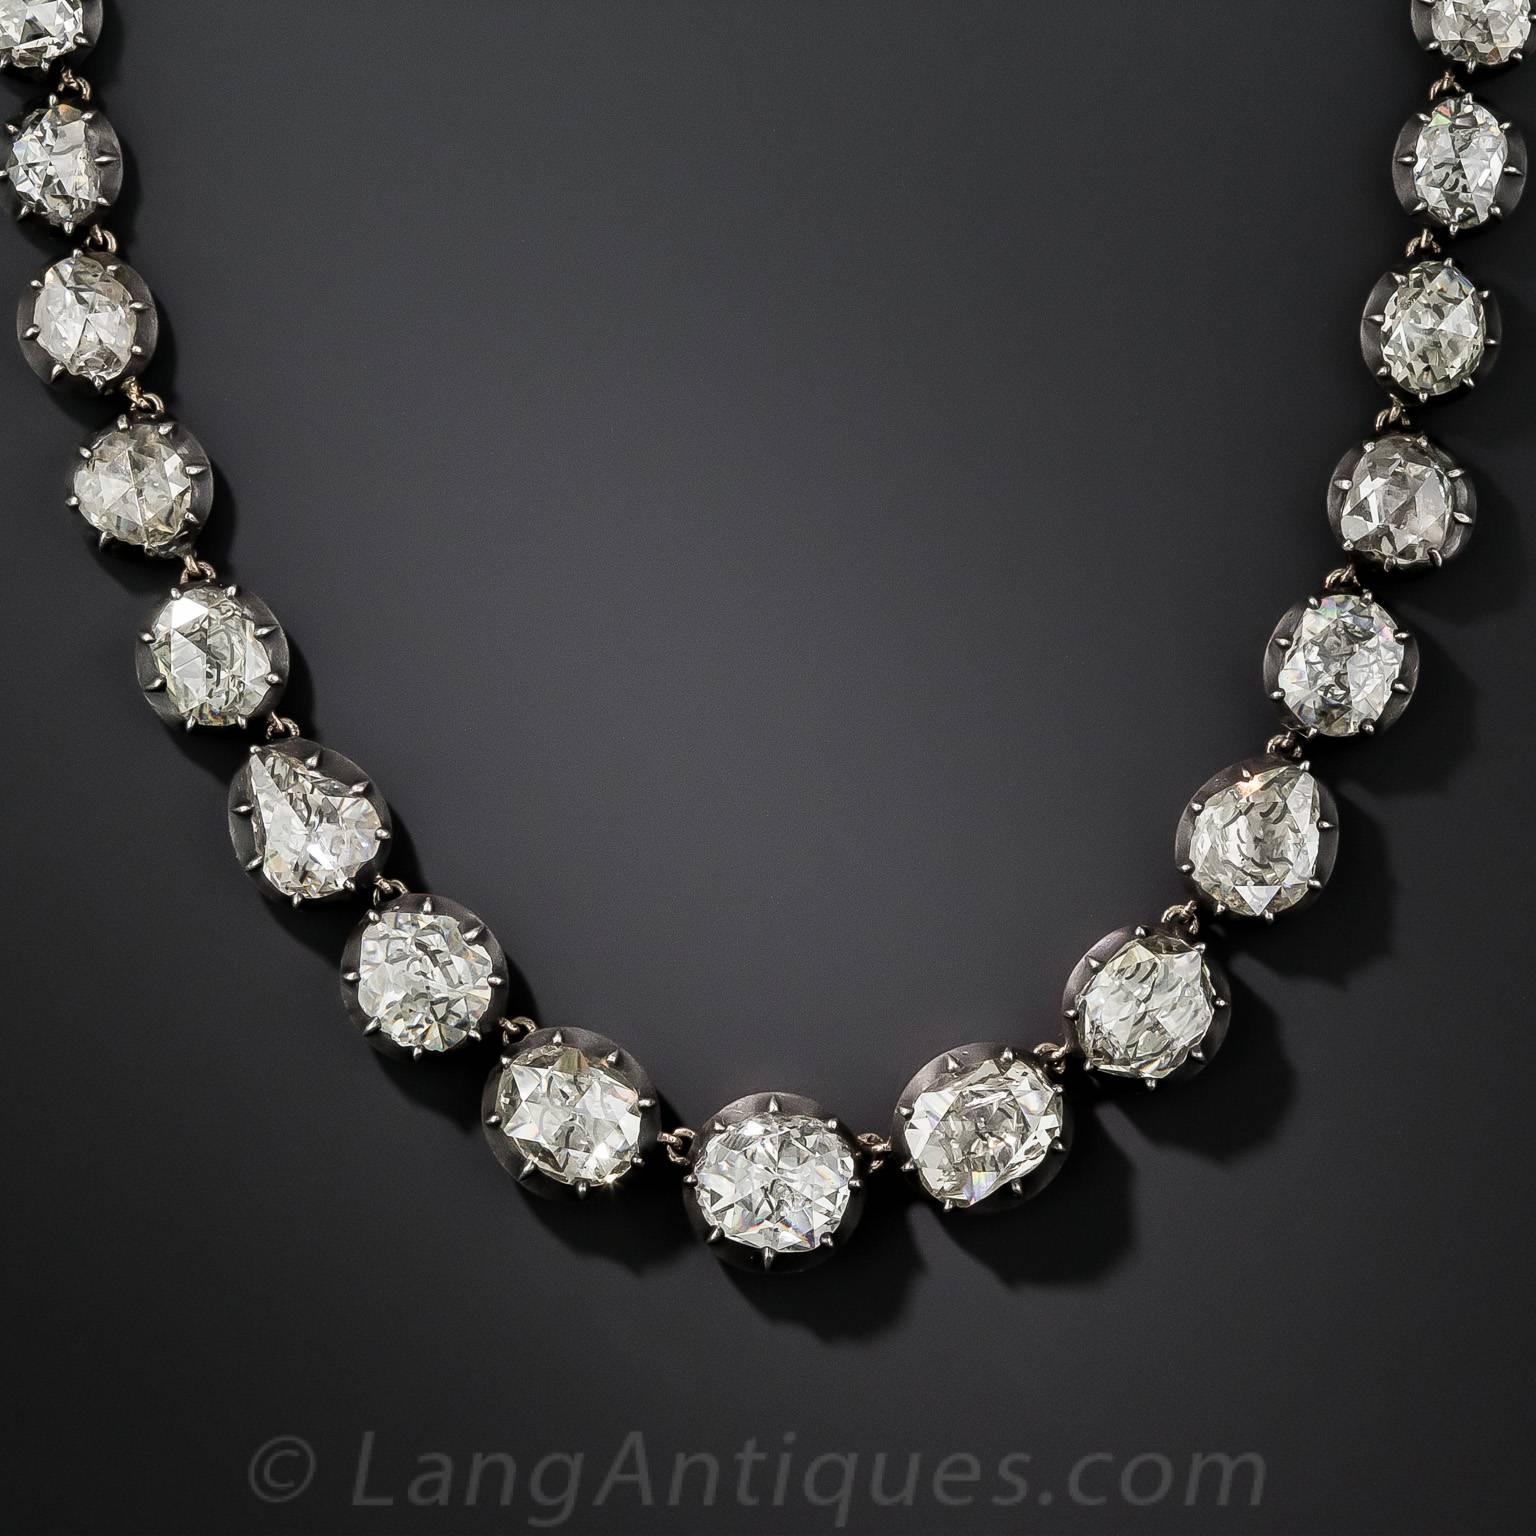 A truly extraordinary, high-quality, nineteenth century Rivière necklace, crafted in darkened silver over rosy-yellow gold, glistening all around, by starlight or candlelight, with a total of 20 carats of bright-white, beautifully cut, high-quality